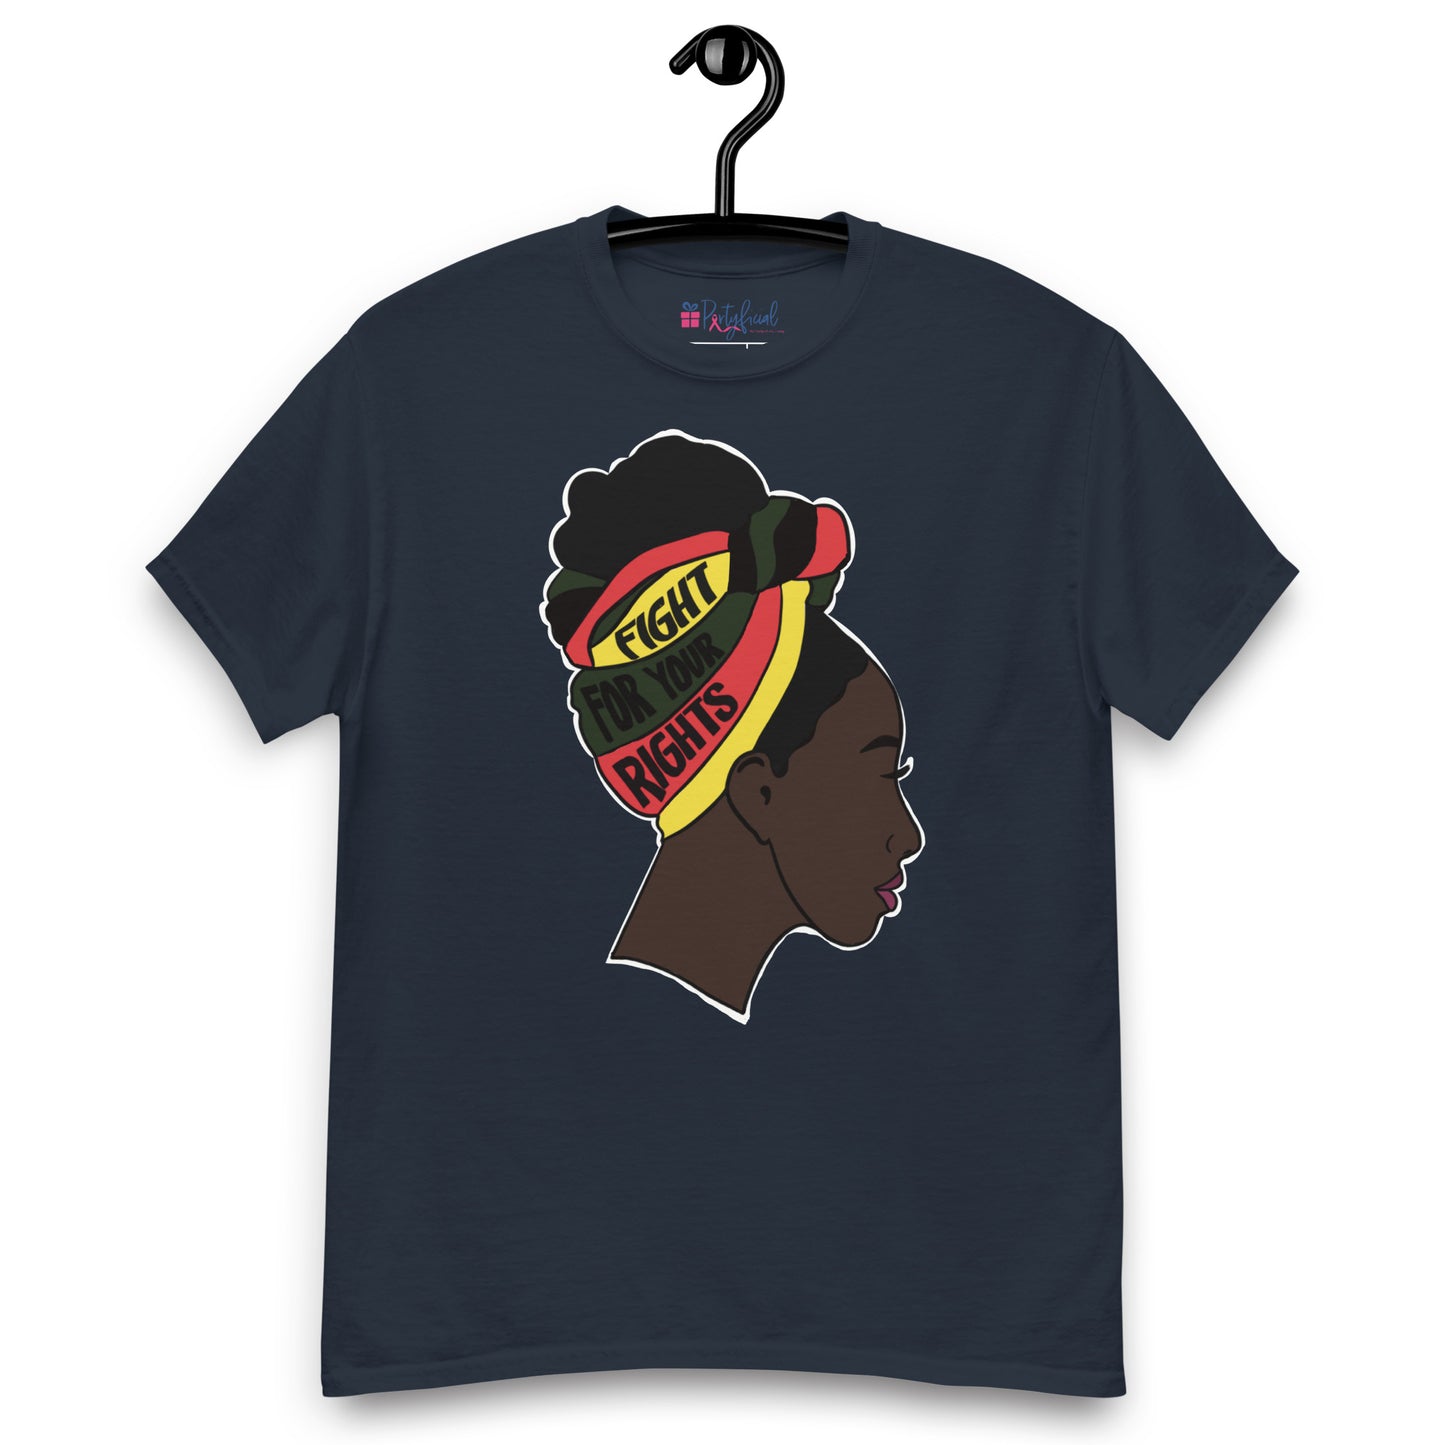 Juneteenth Fight for my rights classic tee